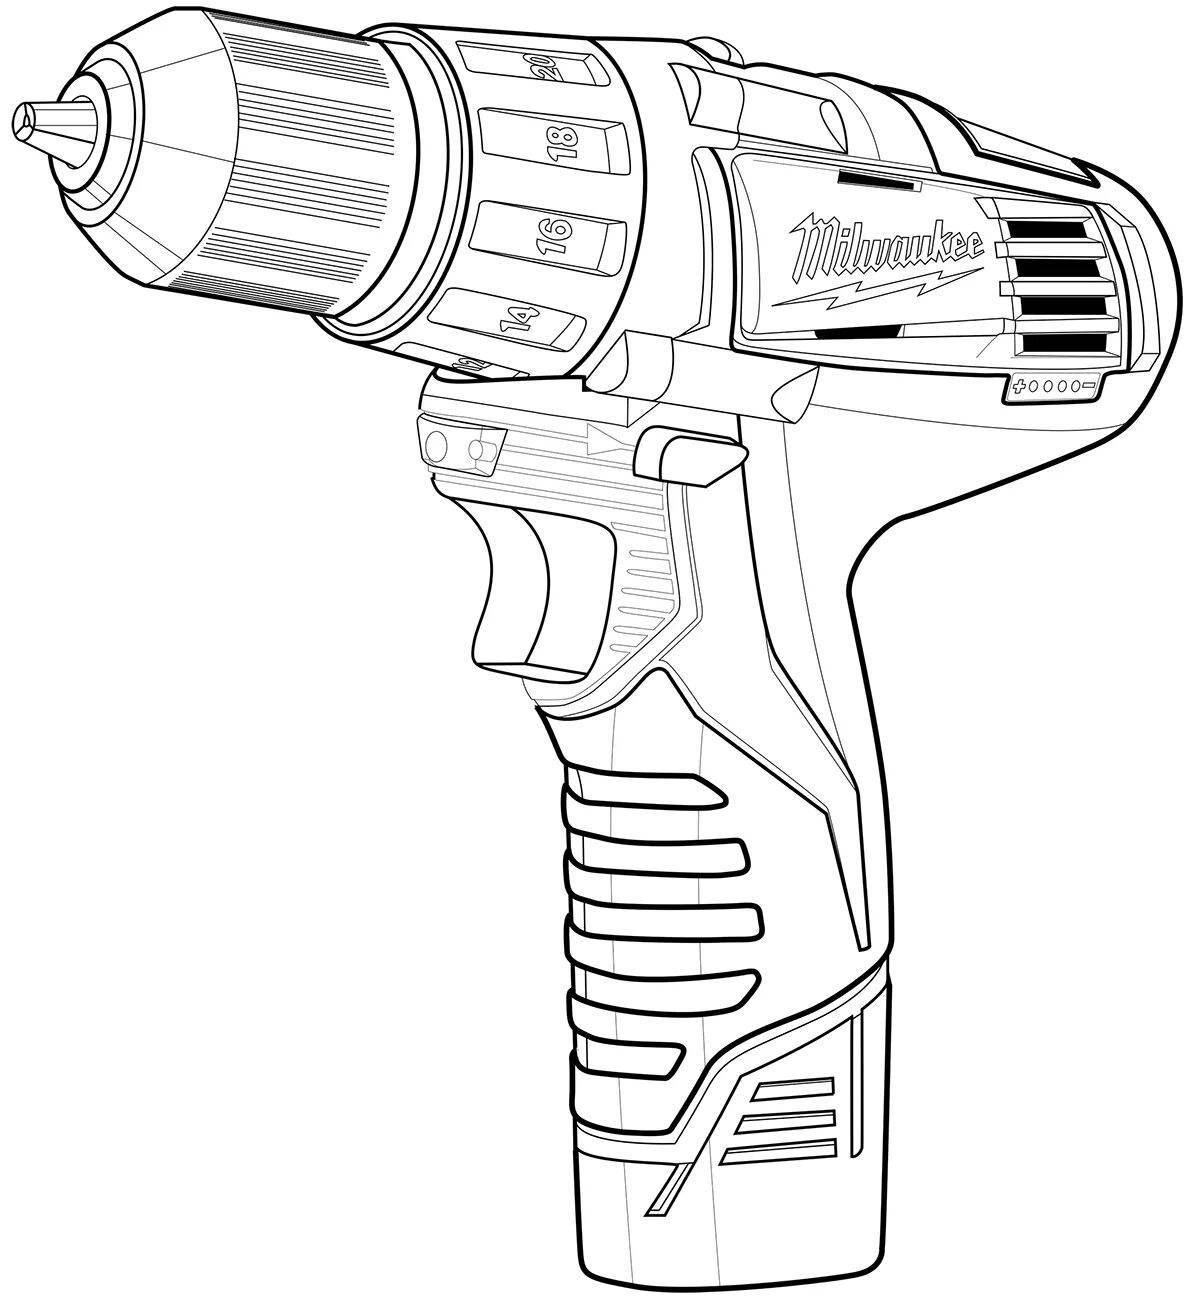 Stylish screwdriver coloring page